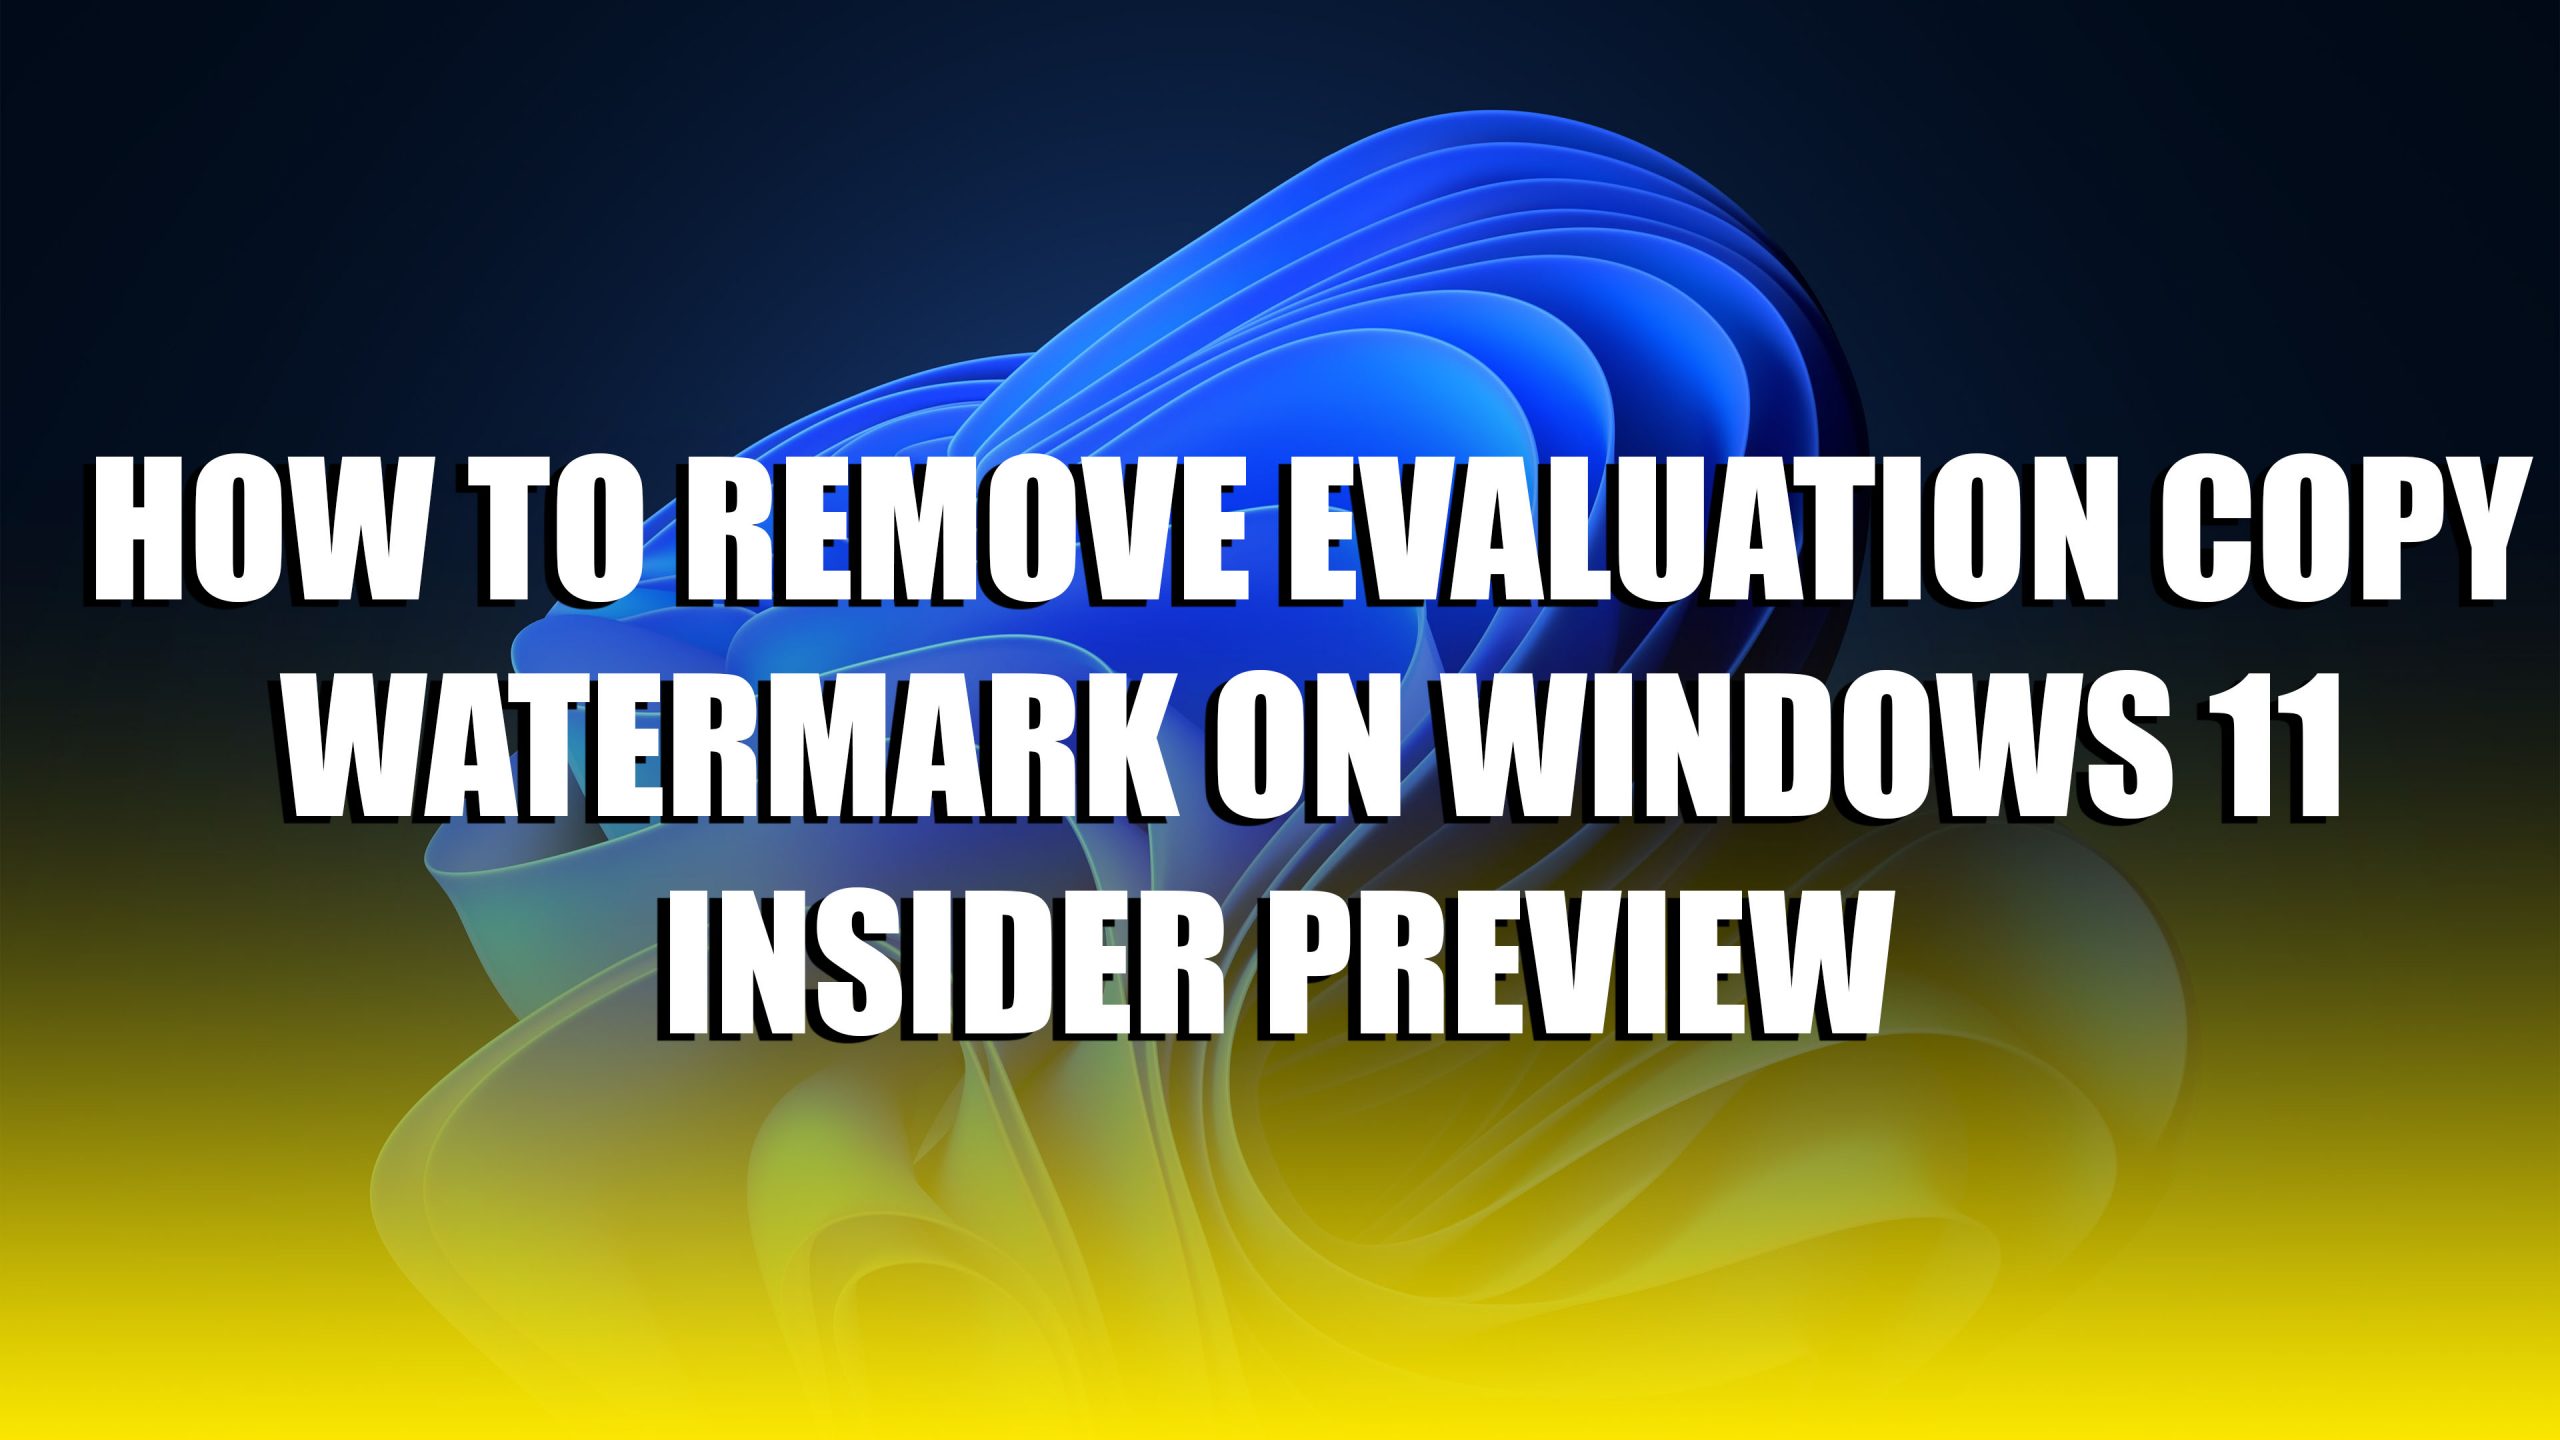 How to Remove Evaluation Copy Watermark on Windows 11 Insider Preview